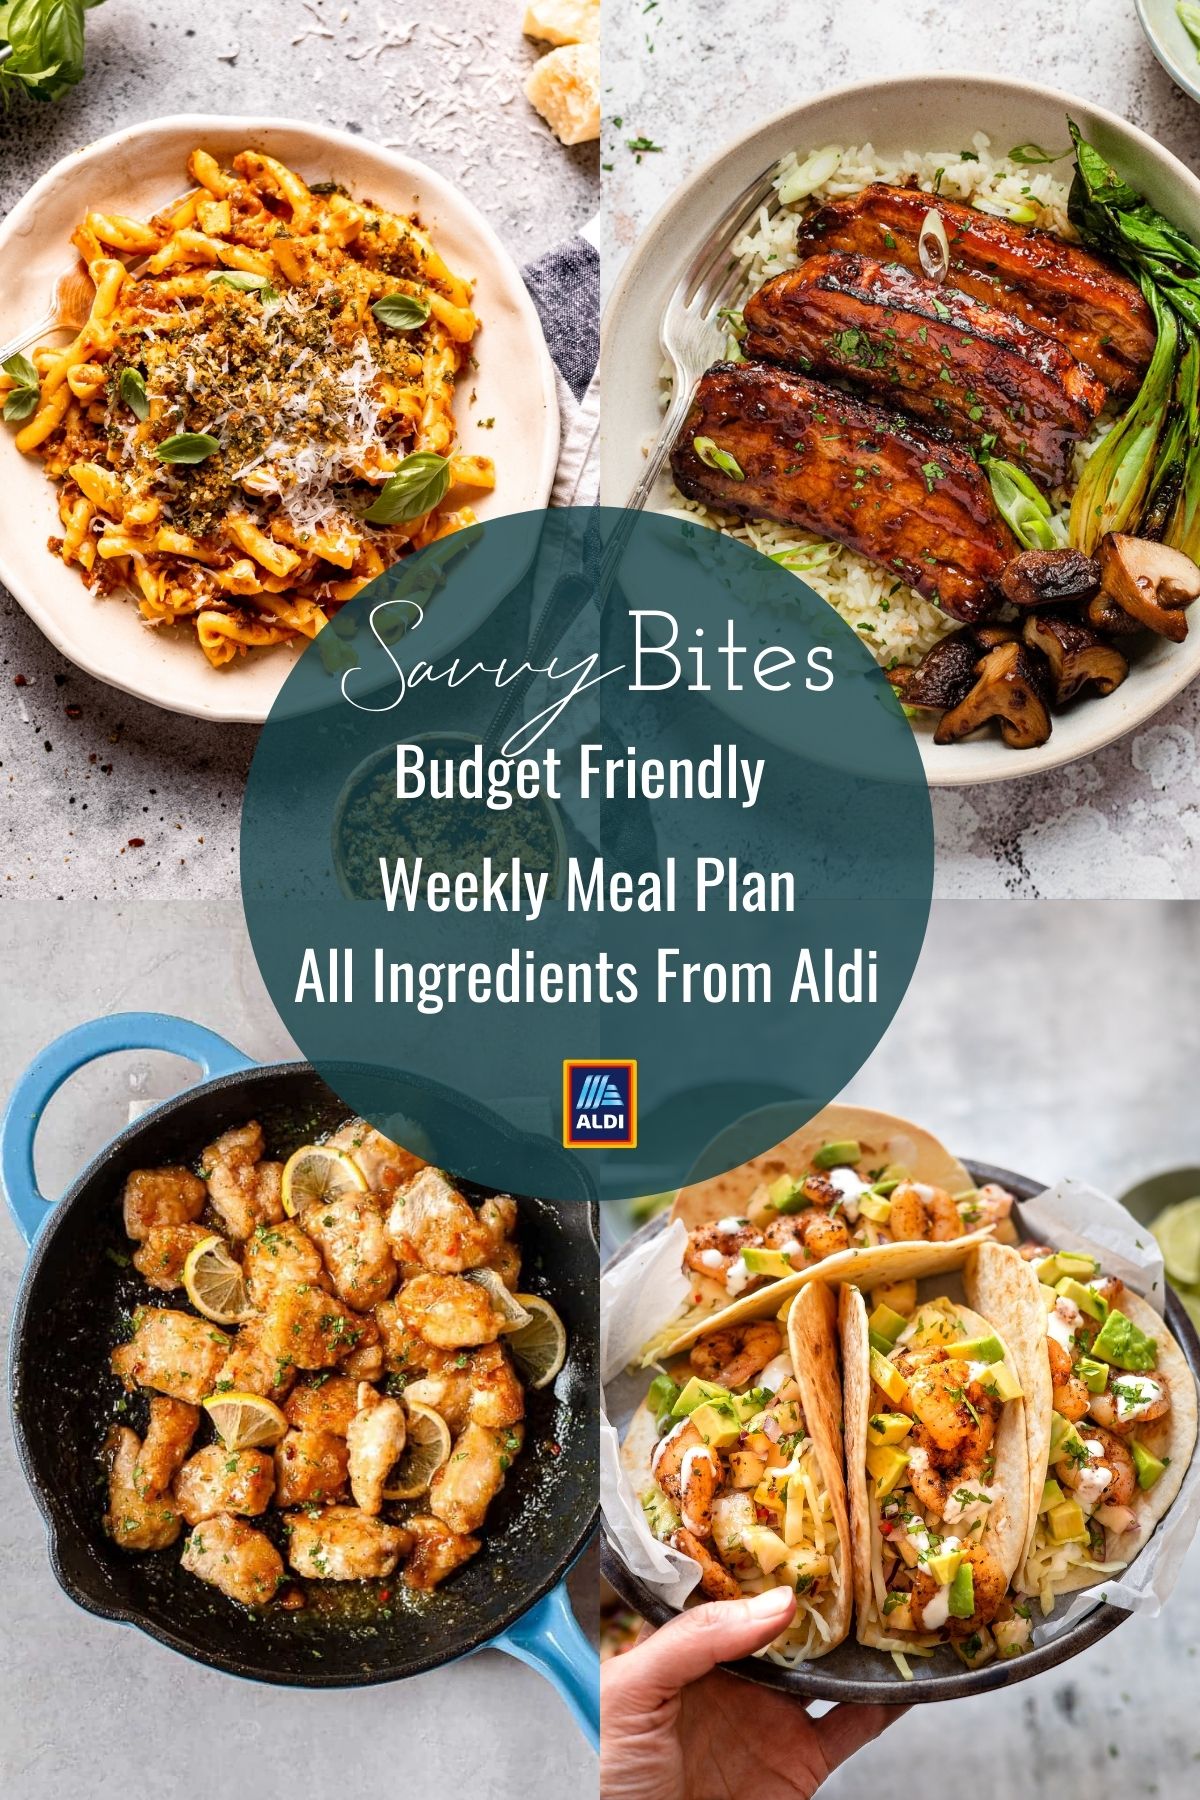 Budget weekly meal plan for families.